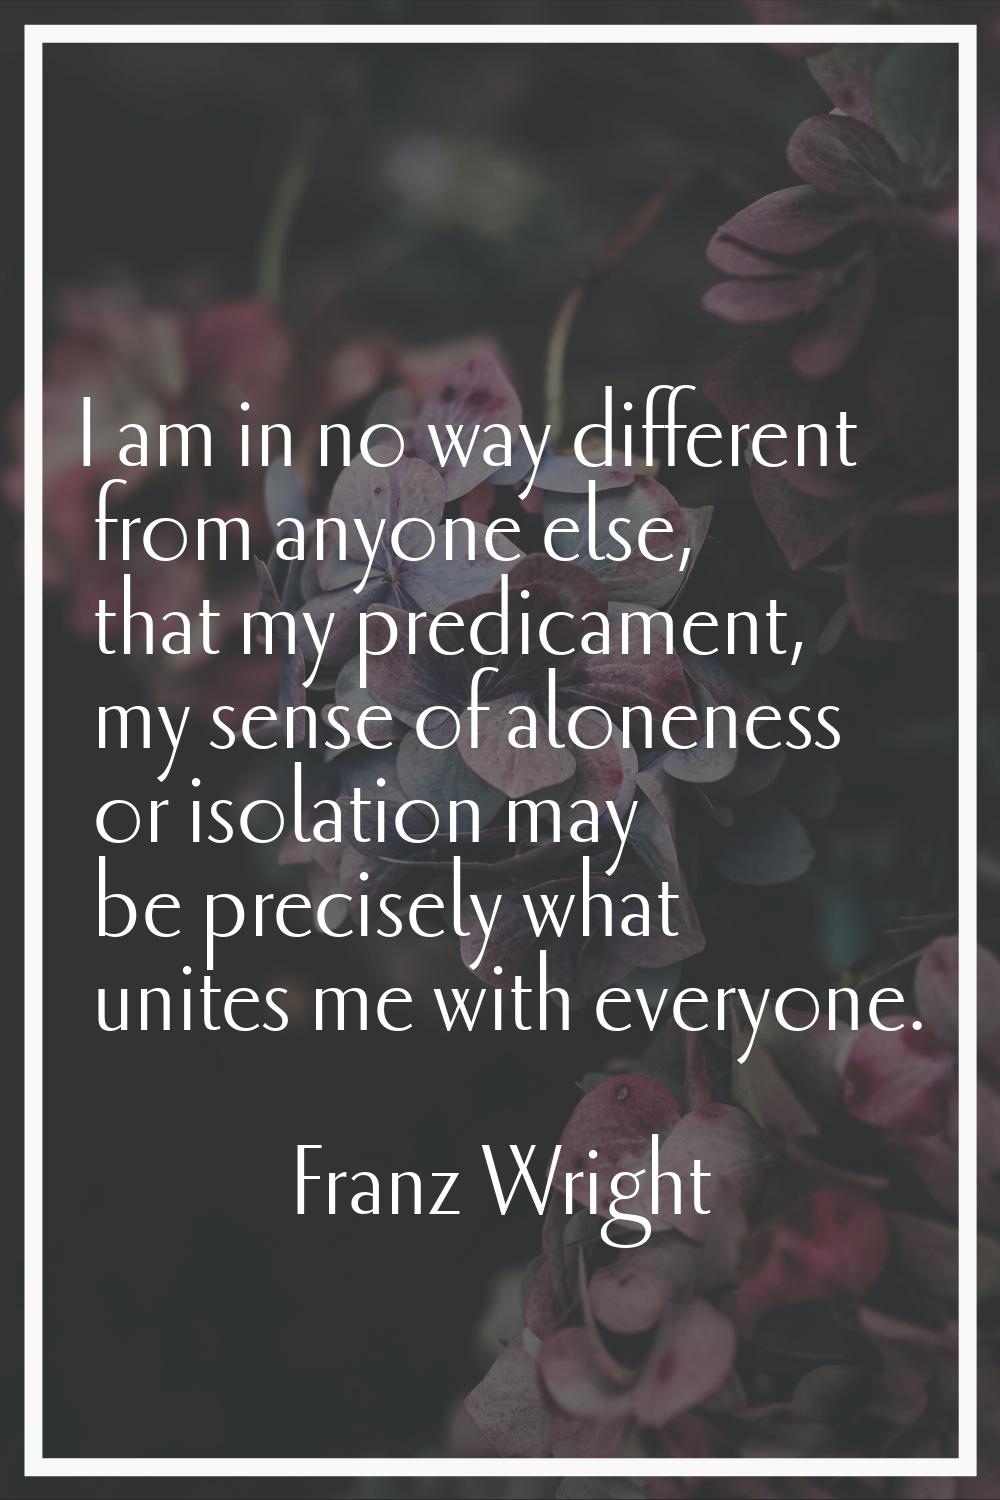 I am in no way different from anyone else, that my predicament, my sense of aloneness or isolation 